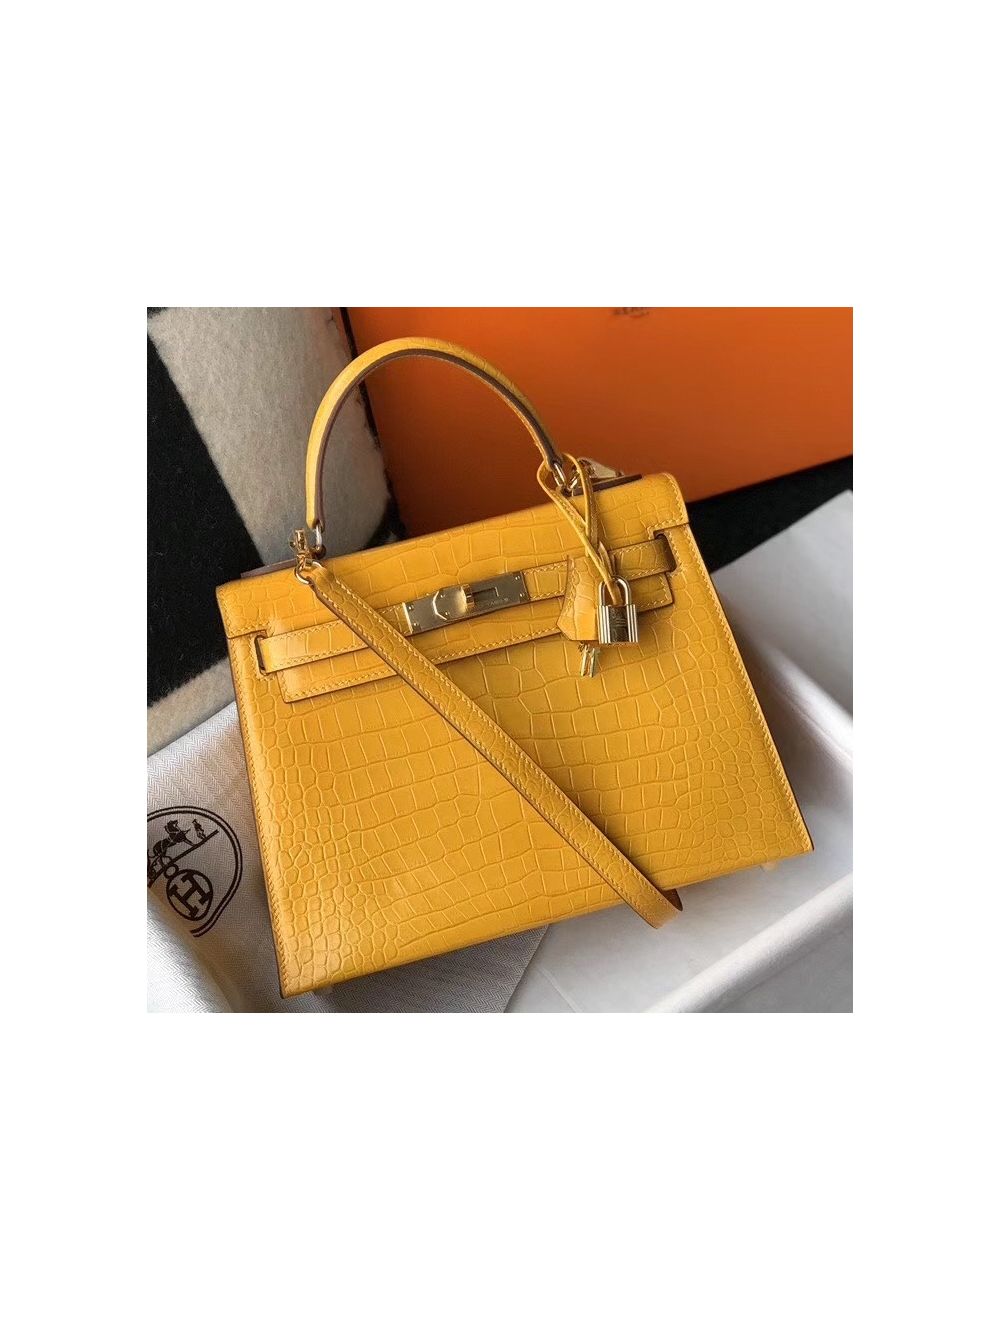 Replica Hermes Kelly 25cm Sellier Bag In Yellow Epsom Leather